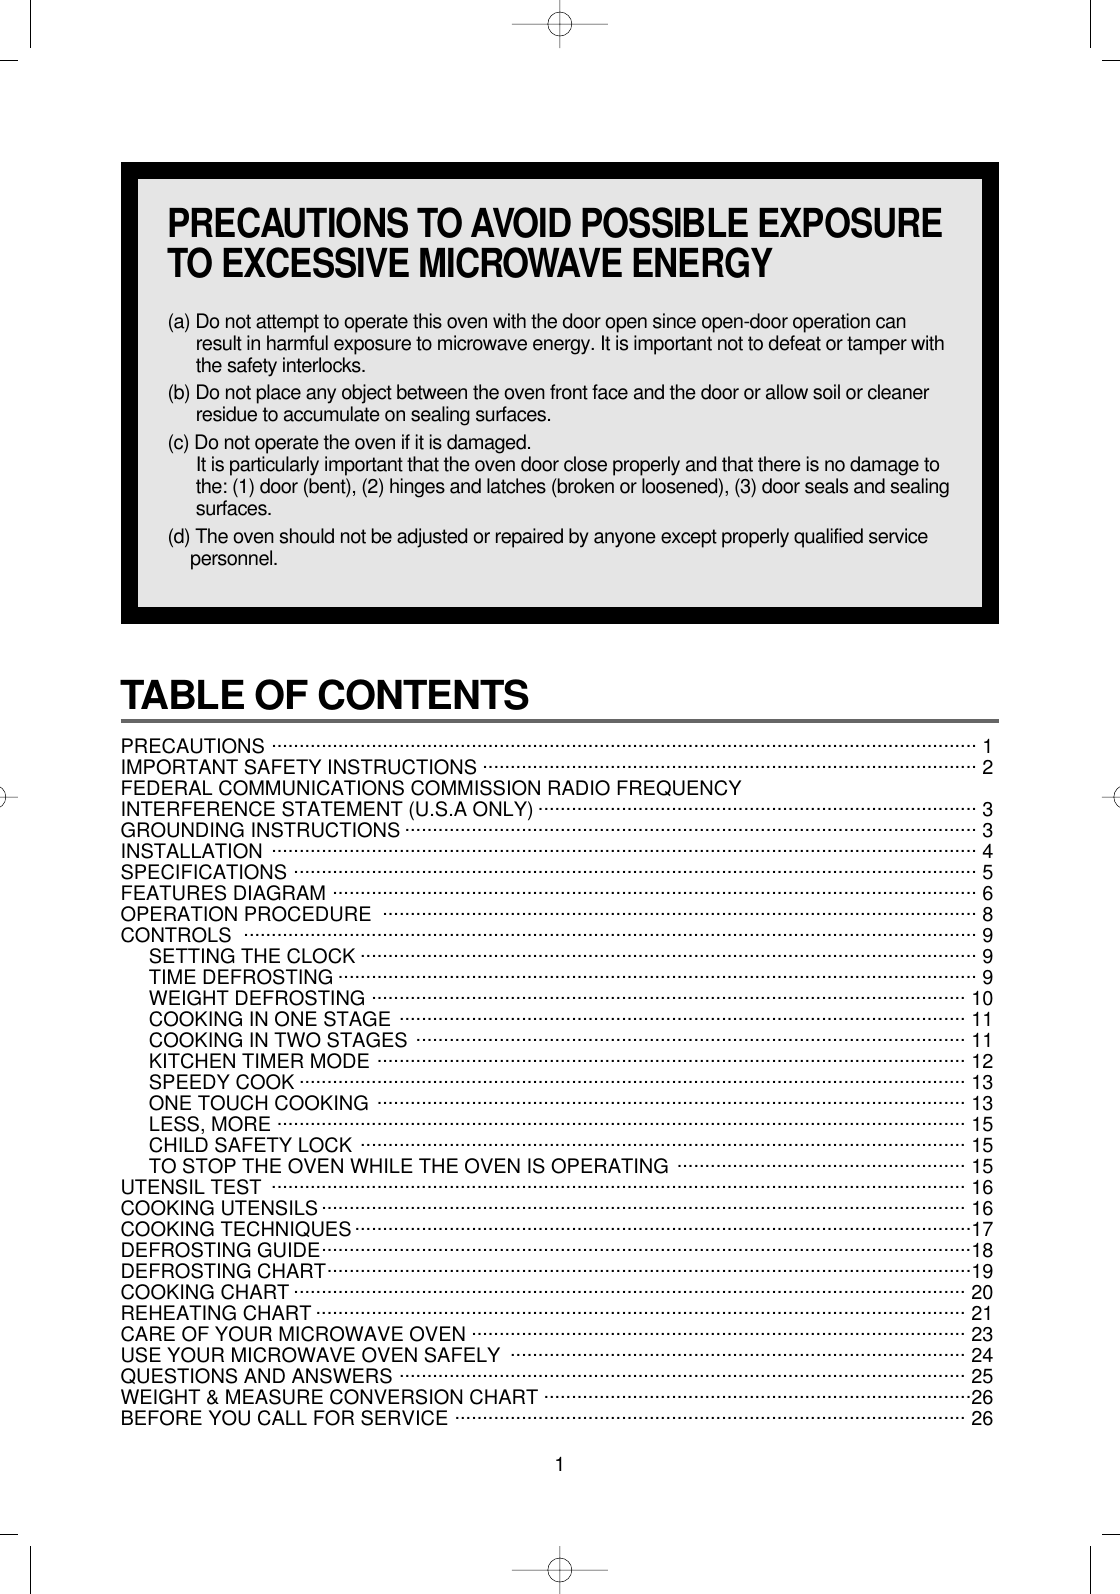 1TABLE OF CONTENTS PRECAUTIONS ............................................................................................................................... 1 IMPORTANT SAFETY INSTRUCTIONS ......................................................................................... 2FEDERAL COMMUNICATIONS COMMISSION RADIO FREQUENCYINTERFERENCE STATEMENT (U.S.A ONLY) ............................................................................... 3GROUNDING INSTRUCTIONS ....................................................................................................... 3INSTALLATION ............................................................................................................................... 4SPECIFICATIONS ........................................................................................................................... 5FEATURES DIAGRAM .................................................................................................................... 6OPERATION PROCEDURE ........................................................................................................... 8CONTROLS .................................................................................................................................... 9SETTING THE CLOCK ............................................................................................................... 9TIME DEFROSTING ................................................................................................................... 9WEIGHT DEFROSTING ........................................................................................................... 10COOKING IN ONE STAGE ...................................................................................................... 11COOKING IN TWO STAGES ................................................................................................... 11KITCHEN TIMER MODE .......................................................................................................... 12SPEEDY COOK ........................................................................................................................ 13ONE TOUCH COOKING .......................................................................................................... 13LESS, MORE ............................................................................................................................ 15CHILD SAFETY LOCK ............................................................................................................. 15TO STOP THE OVEN WHILE THE OVEN IS OPERATING .................................................... 15UTENSIL TEST ............................................................................................................................. 16COOKING UTENSILS.................................................................................................................... 16COOKING TECHNIQUES...............................................................................................................17DEFROSTING GUIDE.....................................................................................................................18DEFROSTING CHART....................................................................................................................19COOKING CHART ......................................................................................................................... 20REHEATING CHART ..................................................................................................................... 21CARE OF YOUR MICROWAVE OVEN ......................................................................................... 23USE YOUR MICROWAVE OVEN SAFELY  .................................................................................. 24QUESTIONS AND ANSWERS ...................................................................................................... 25WEIGHT &amp; MEASURE CONVERSION CHART .............................................................................26BEFORE YOU CALL FOR SERVICE ............................................................................................ 26PRECAUTIONS TO AVOID POSSIBLE EXPOSURETO EXCESSIVE MICROWAVE ENERGY(a) Do not attempt to operate this oven with the door open since open-door operation canresult in harmful exposure to microwave energy. It is important not to defeat or tamper withthe safety interlocks.(b) Do not place any object between the oven front face and the door or allow soil or cleanerresidue to accumulate on sealing surfaces.(c) Do not operate the oven if it is damaged.It is particularly important that the oven door close properly and that there is no damage tothe: (1) door (bent), (2) hinges and latches (broken or loosened), (3) door seals and sealingsurfaces.(d) The oven should not be adjusted or repaired by anyone except properly qualified servicepersonnel.